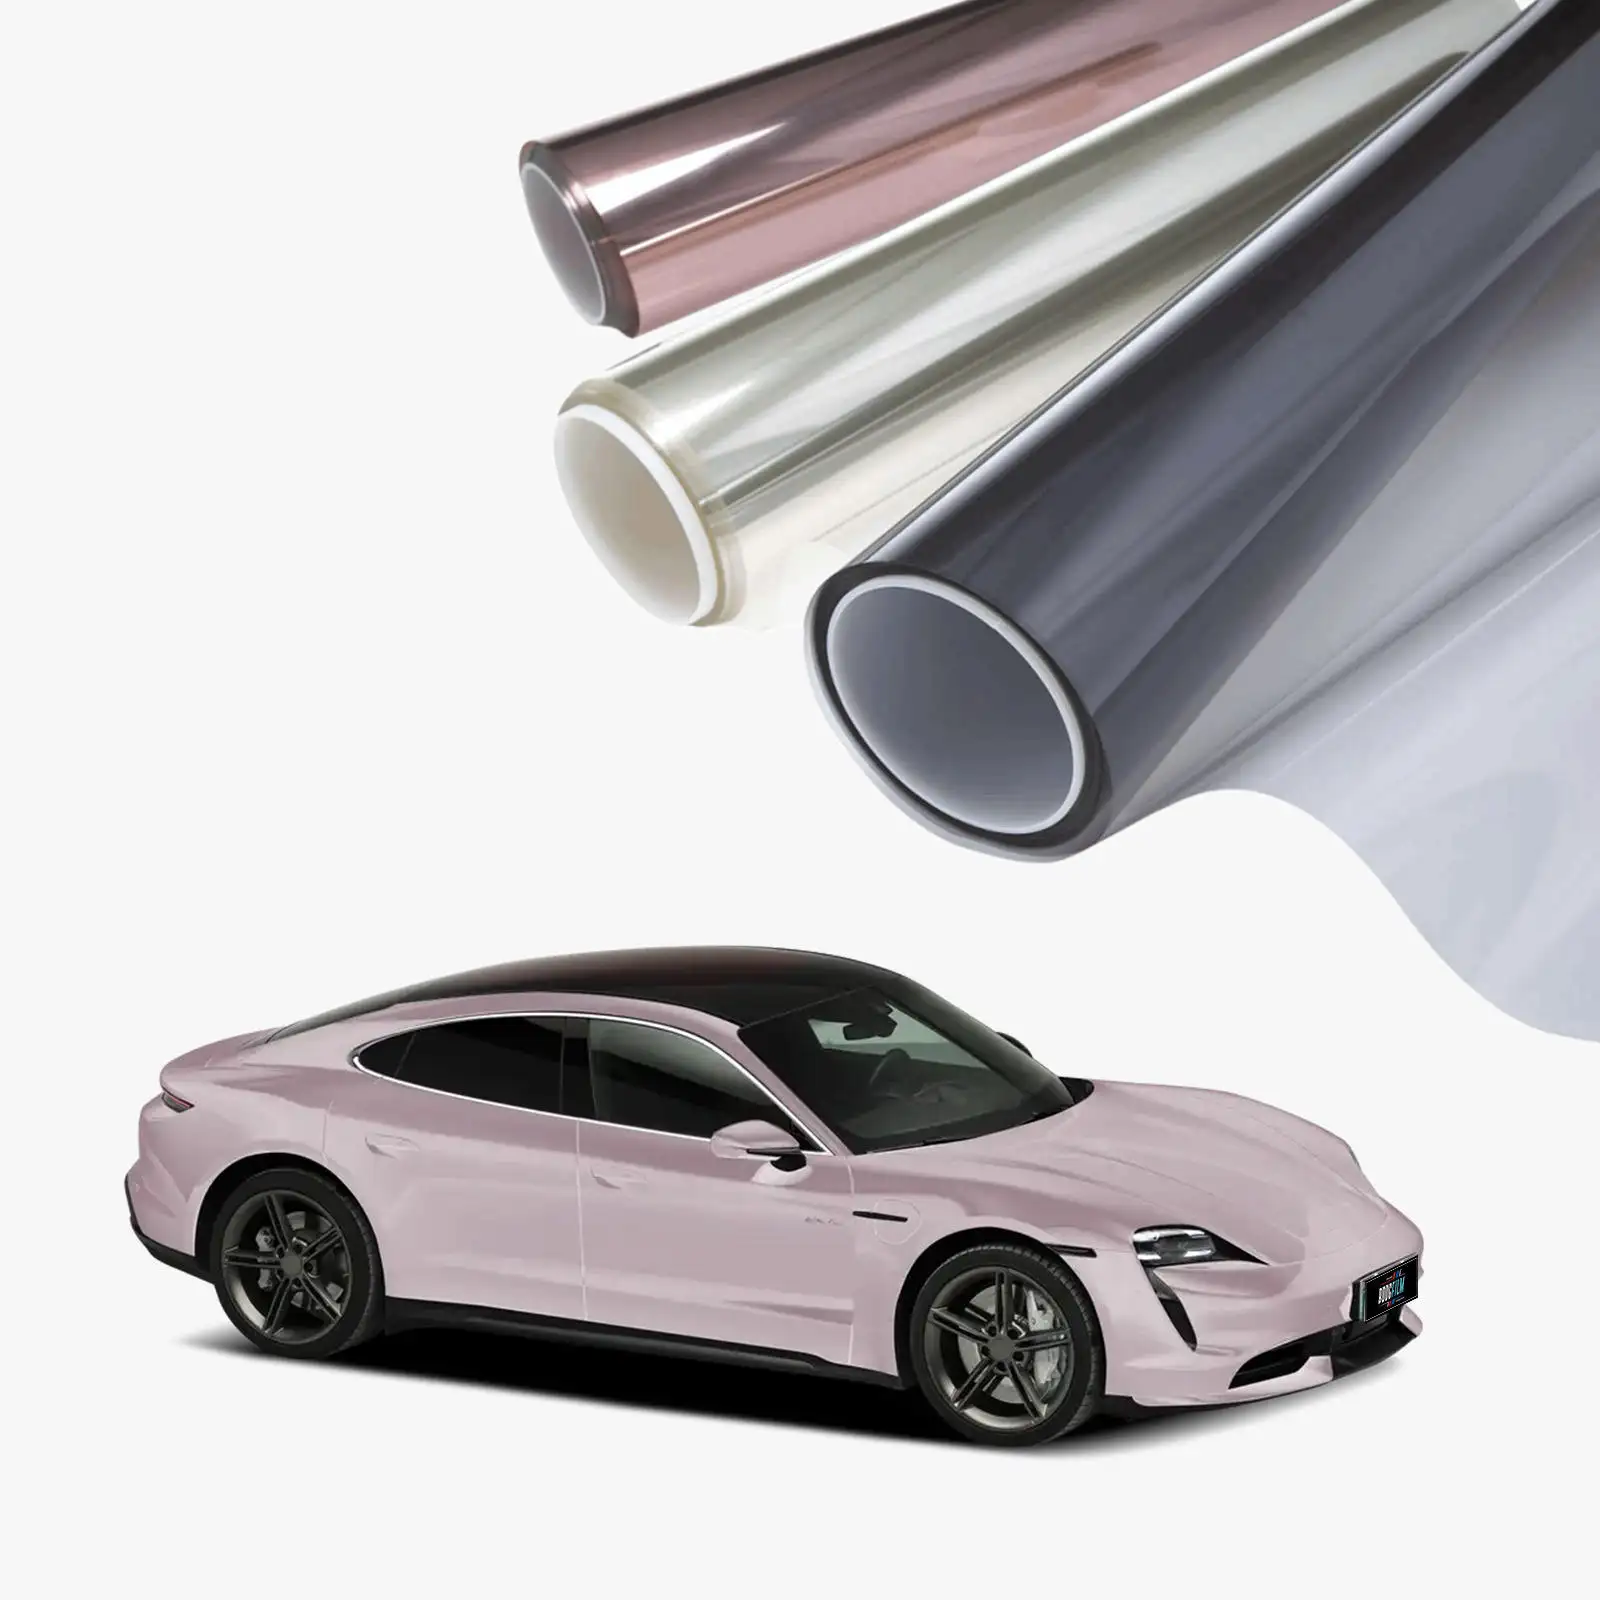 SF-CR Series 1.52X30M Windows Tint For Car Anti Shatter Glass Pet Scratch Protection Llumar Quality Tinting Films